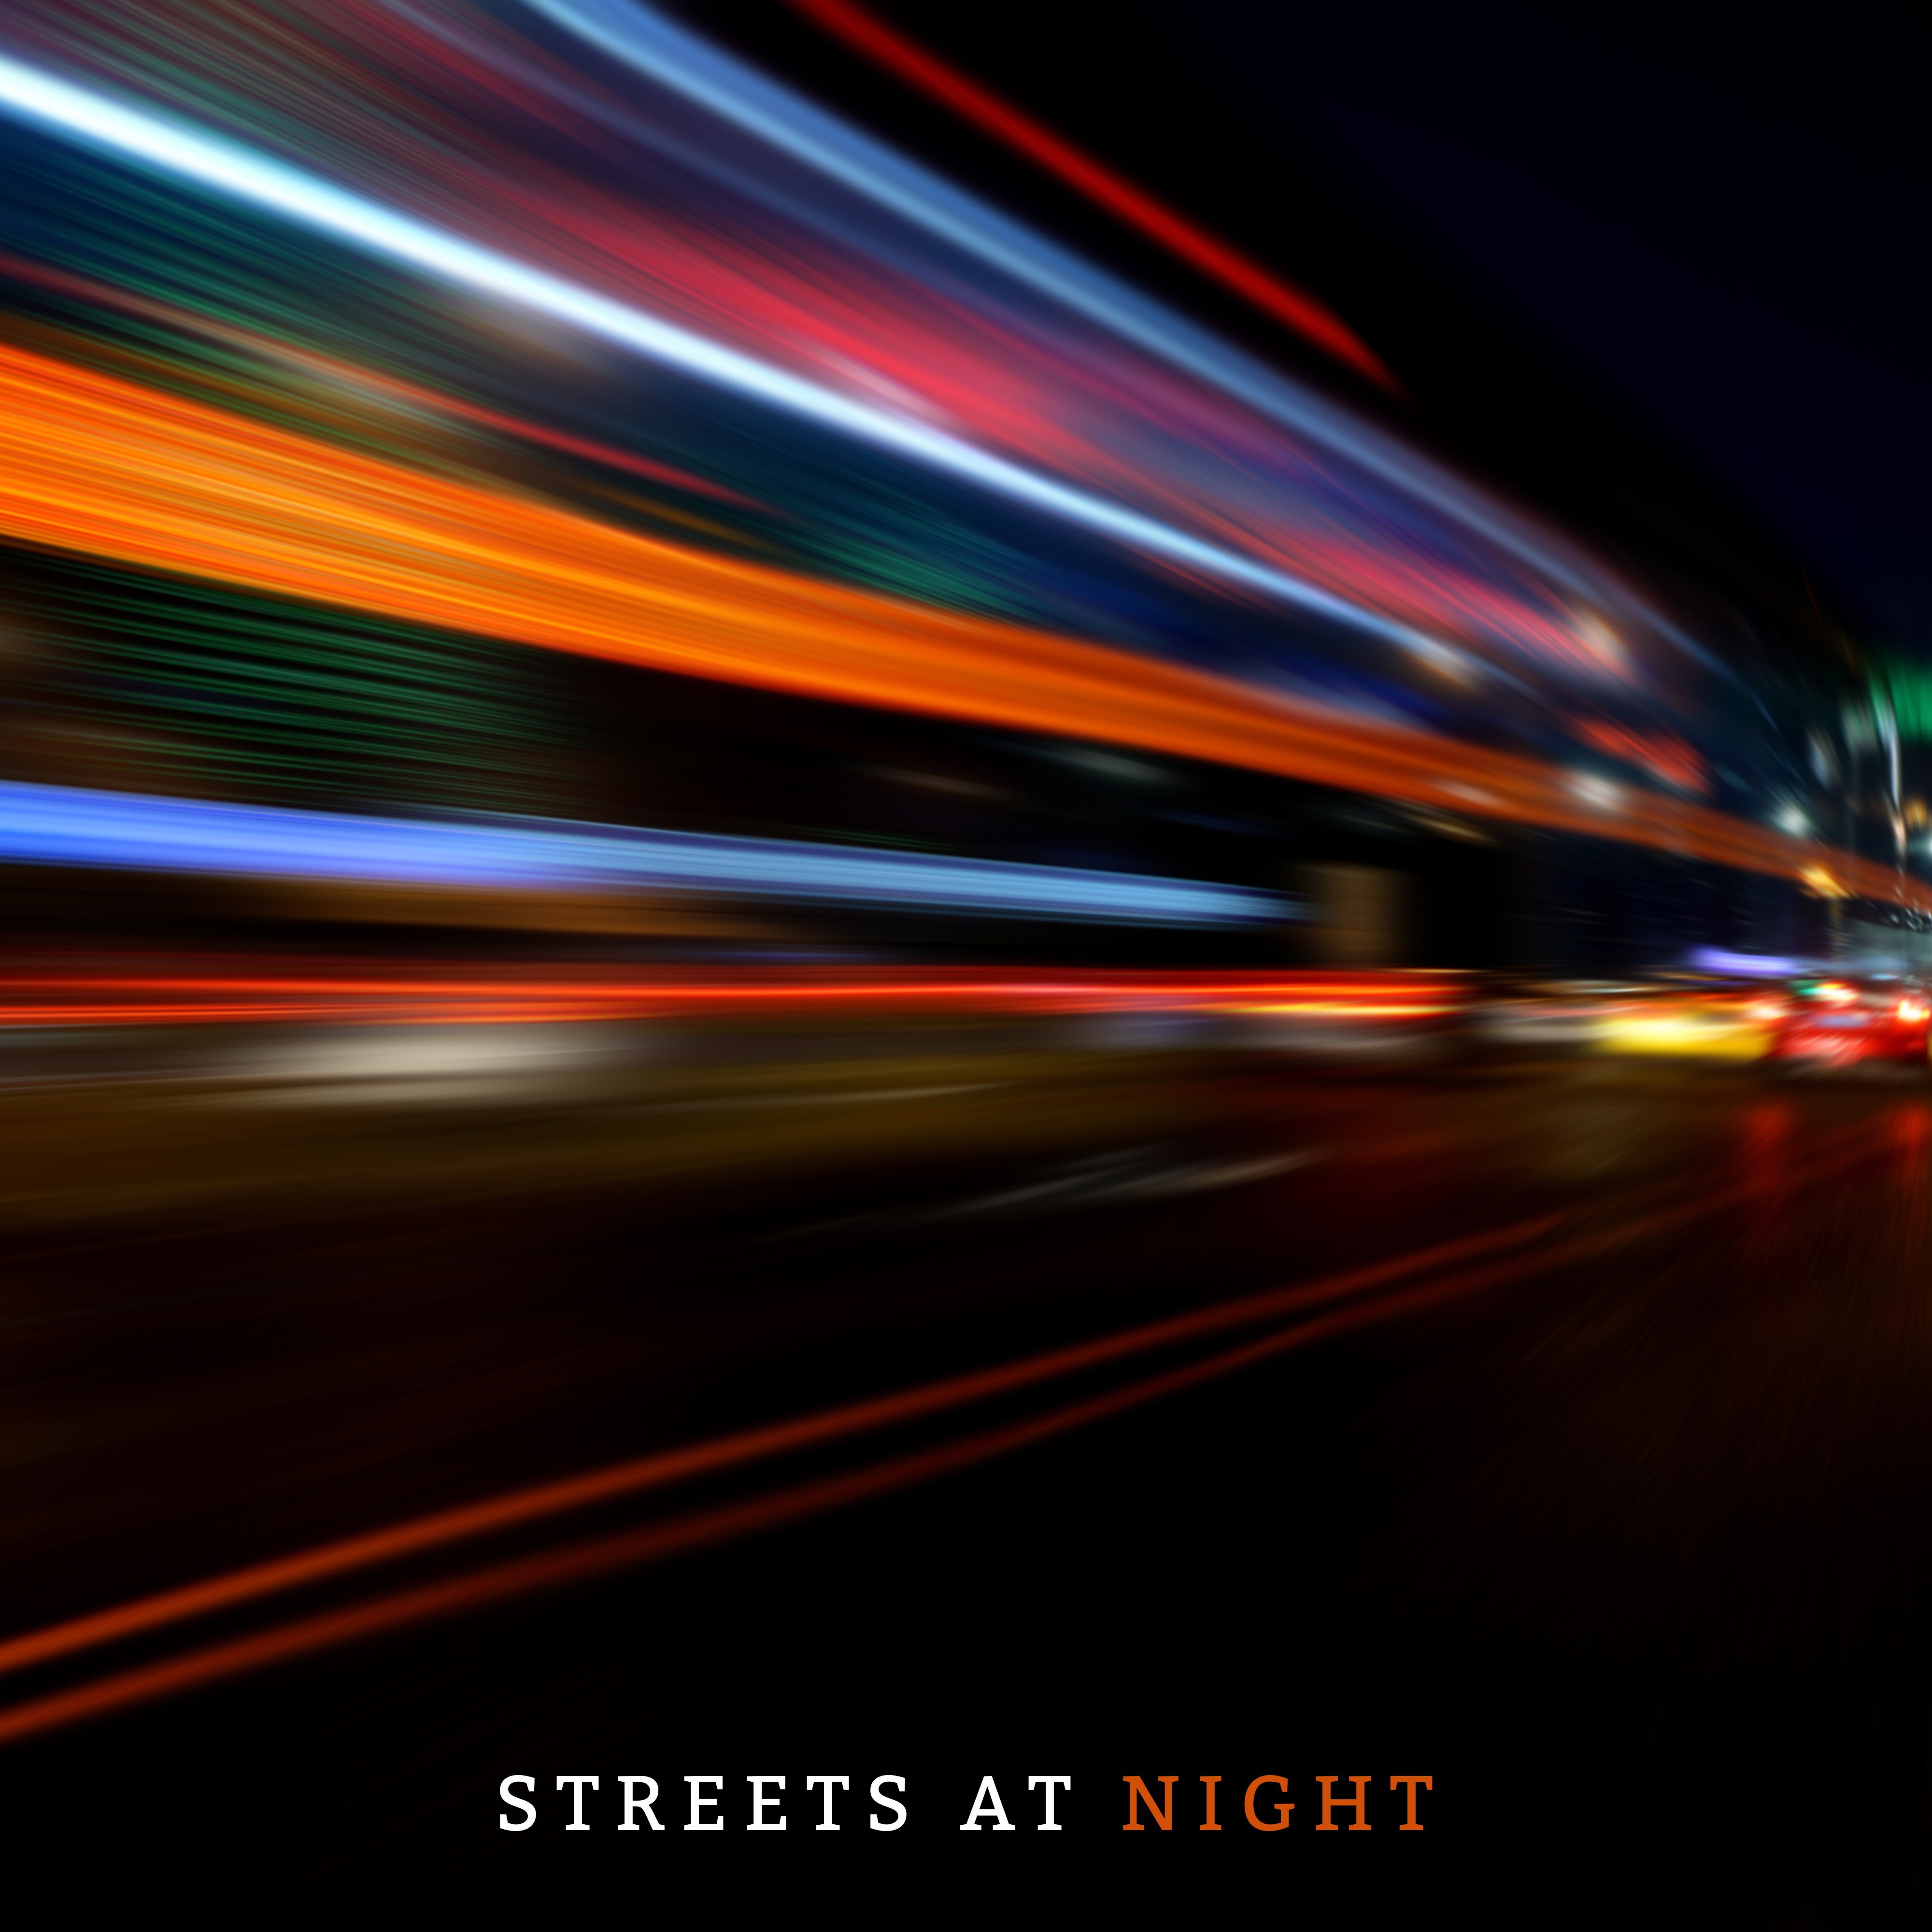 Streets at Night: Chillout Musical Compositions for a Night Journey by Car, to Relax while Lying in Bed or Resting at Home